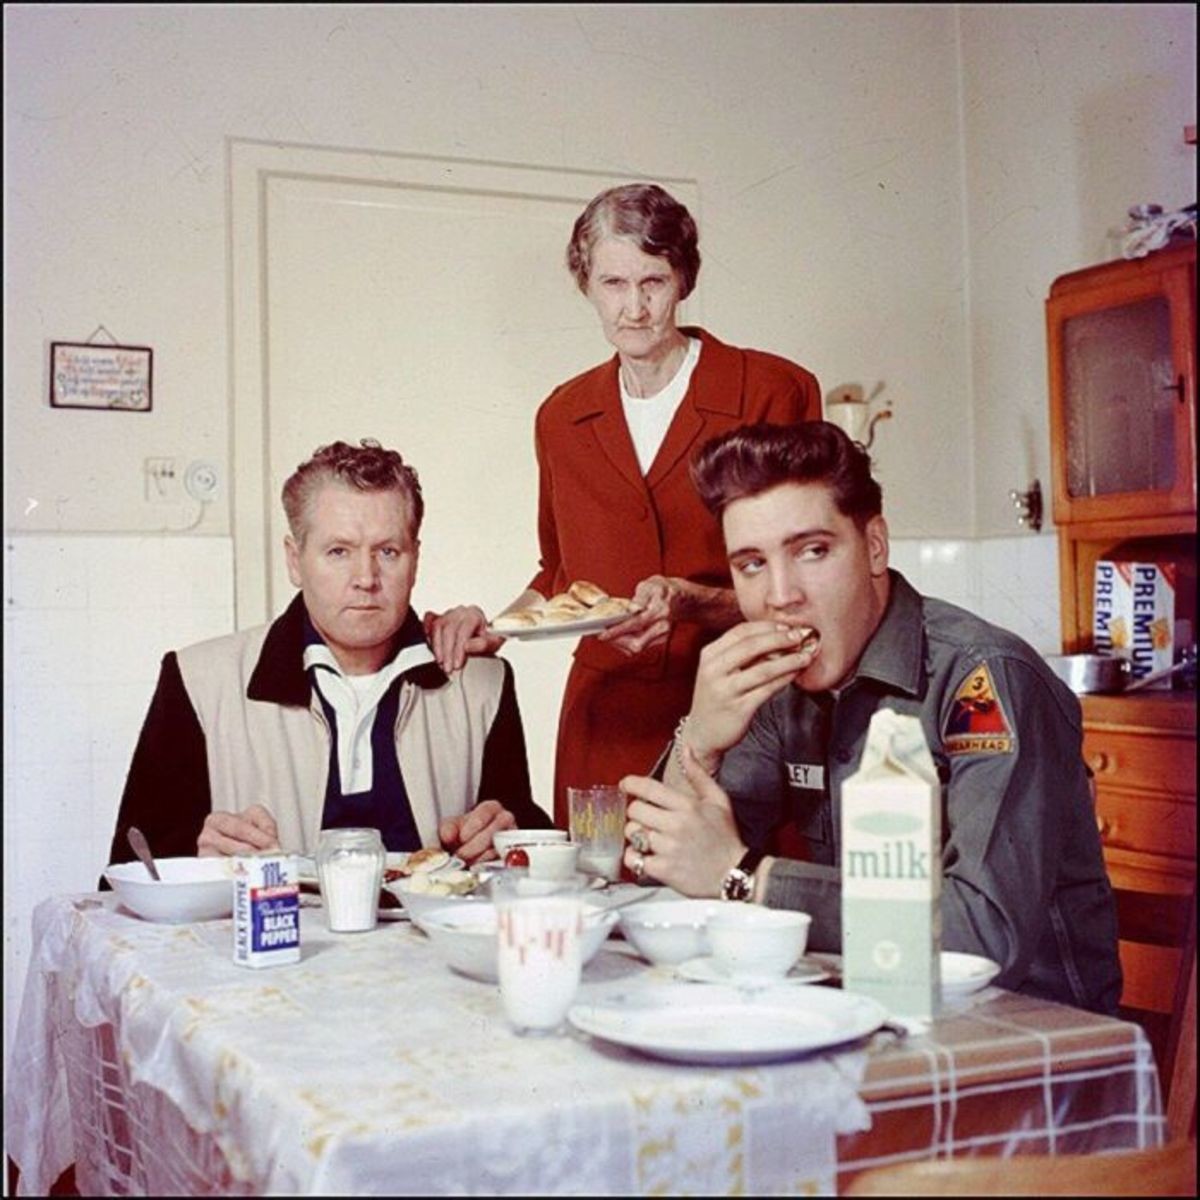 Elvis' parents look so disappointed. .. To me it looks like a photoshoot, you have the stern and angry looking parents and then the carefree and nonchalant Elvis eating and looking in the distance.